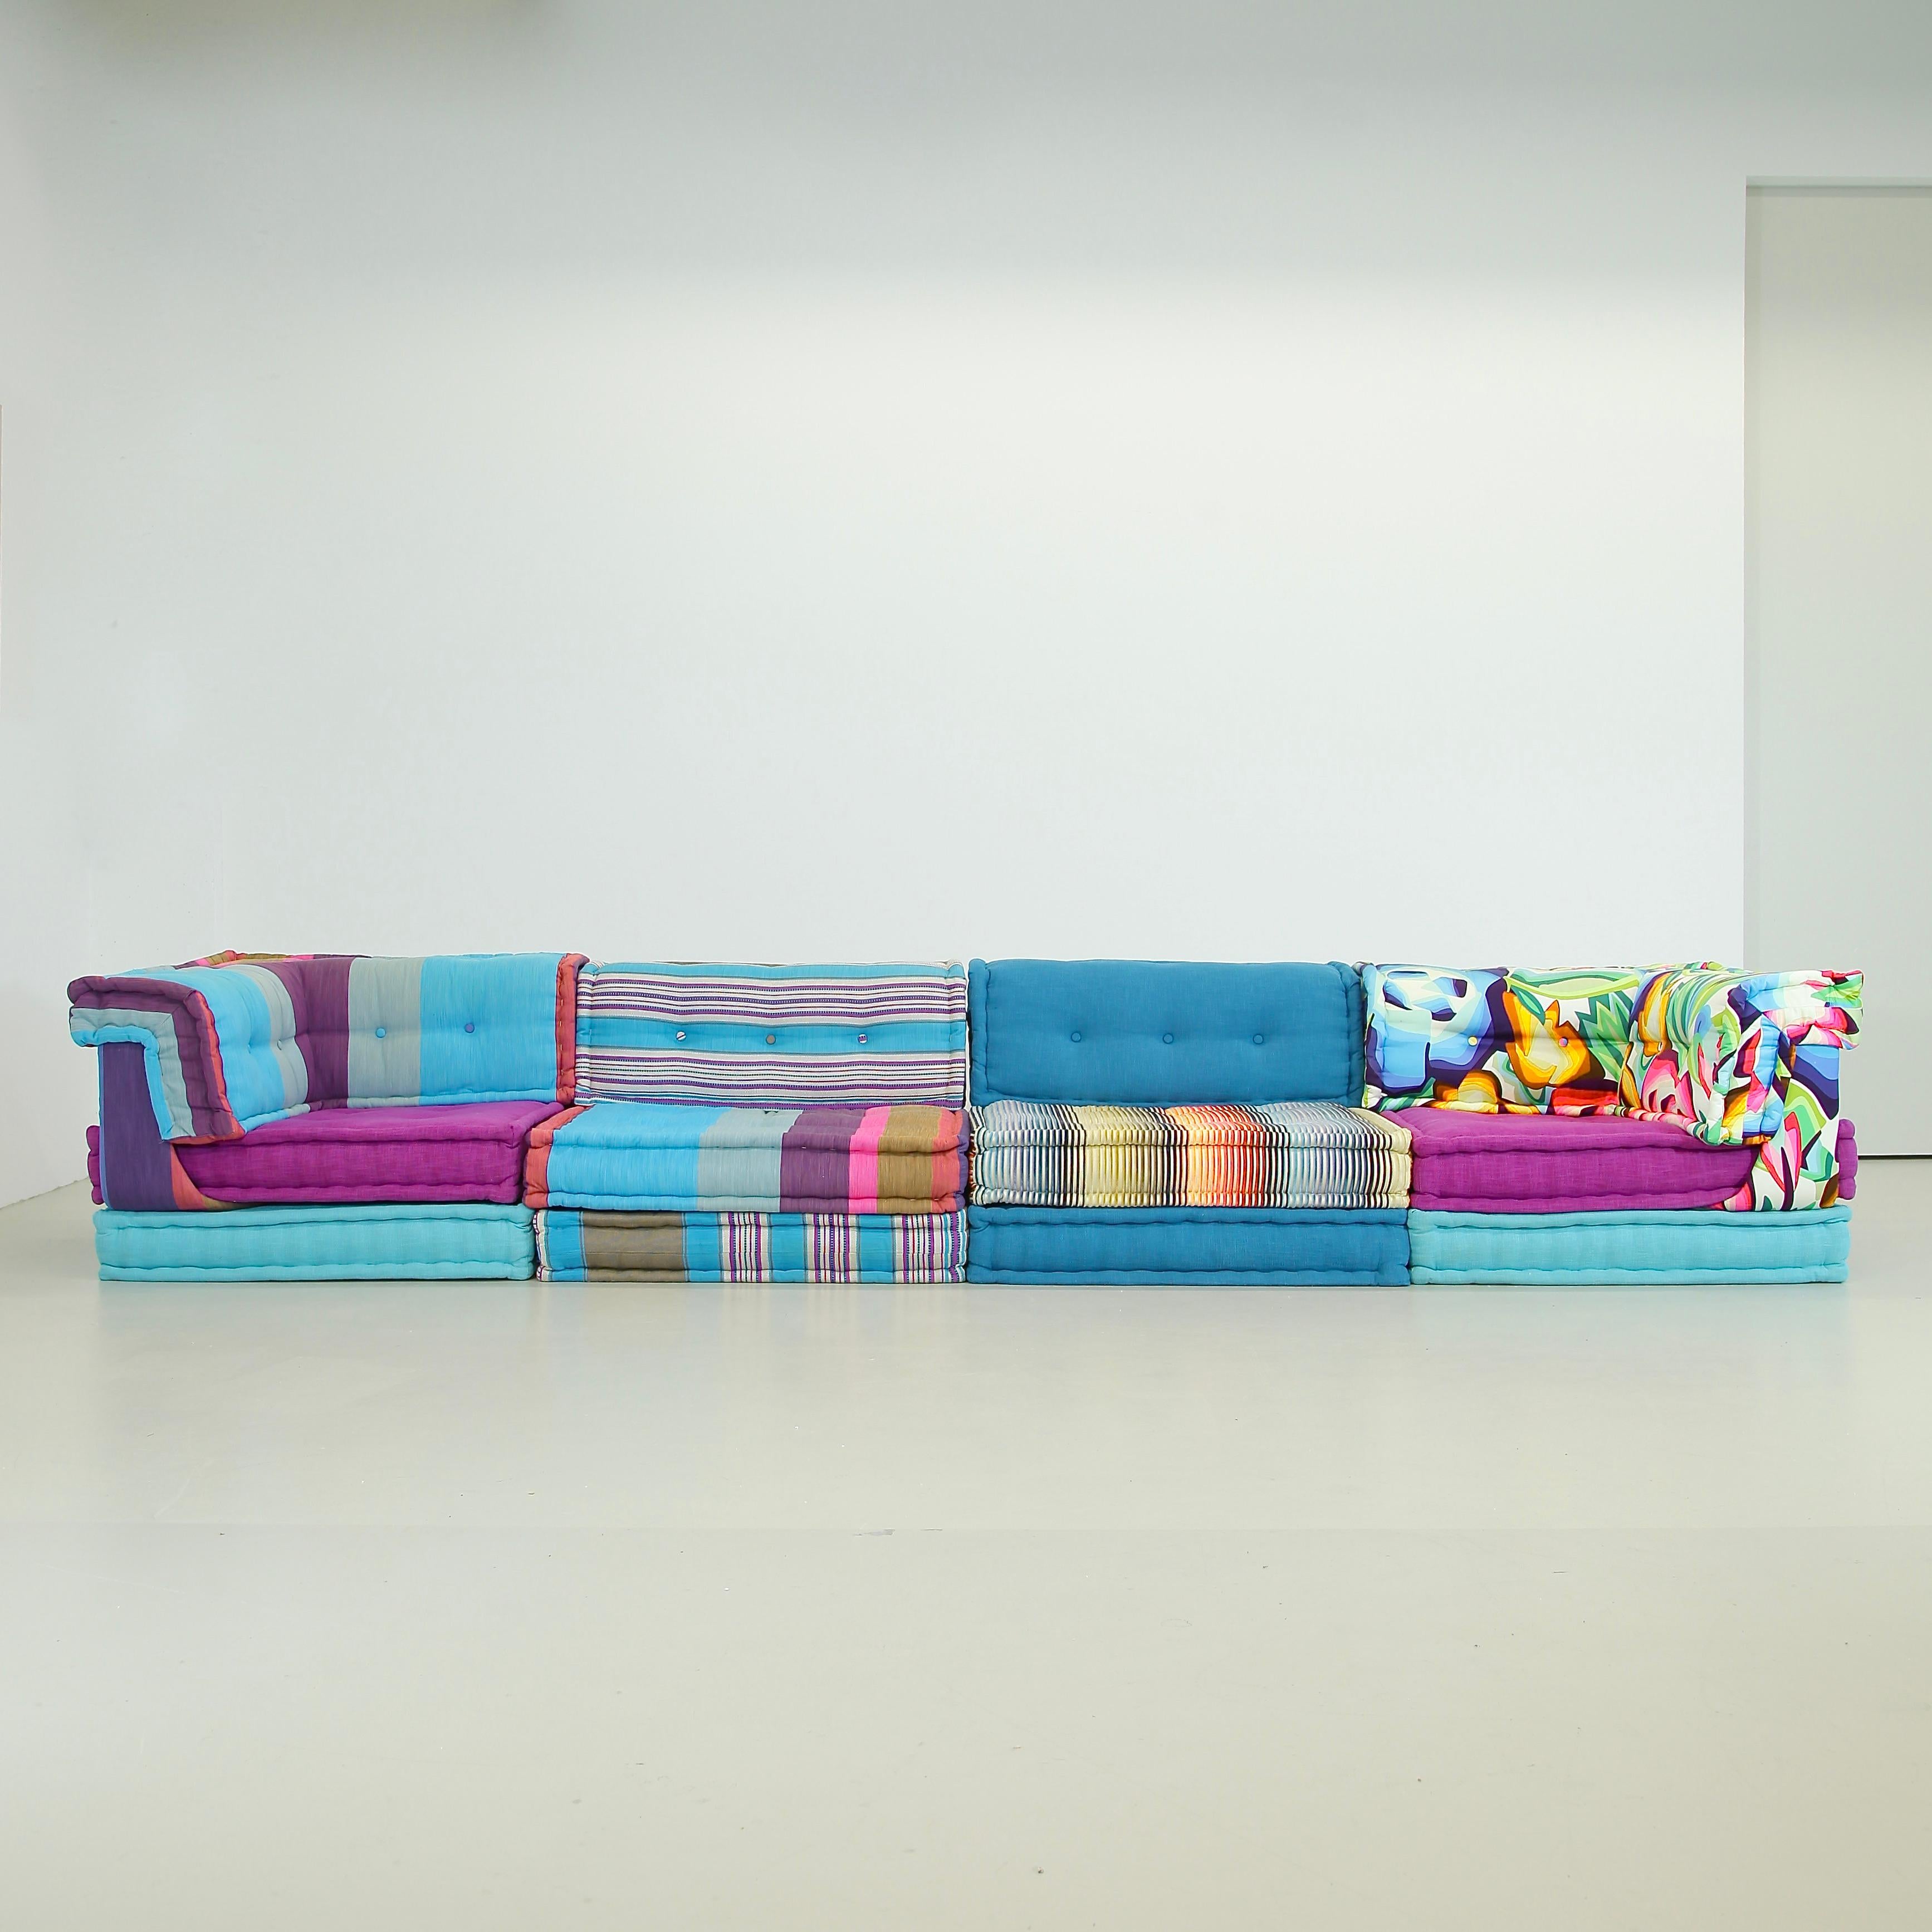 Modular sofa group, designed by Hans Hopfer. Roche Bobois, France, 1971.

Beautiful large modular sofa with a mixture of components, hand-sewn rolled edge, quilted seat and back cushions, upholstery designs by Missoni and others. The set comprises